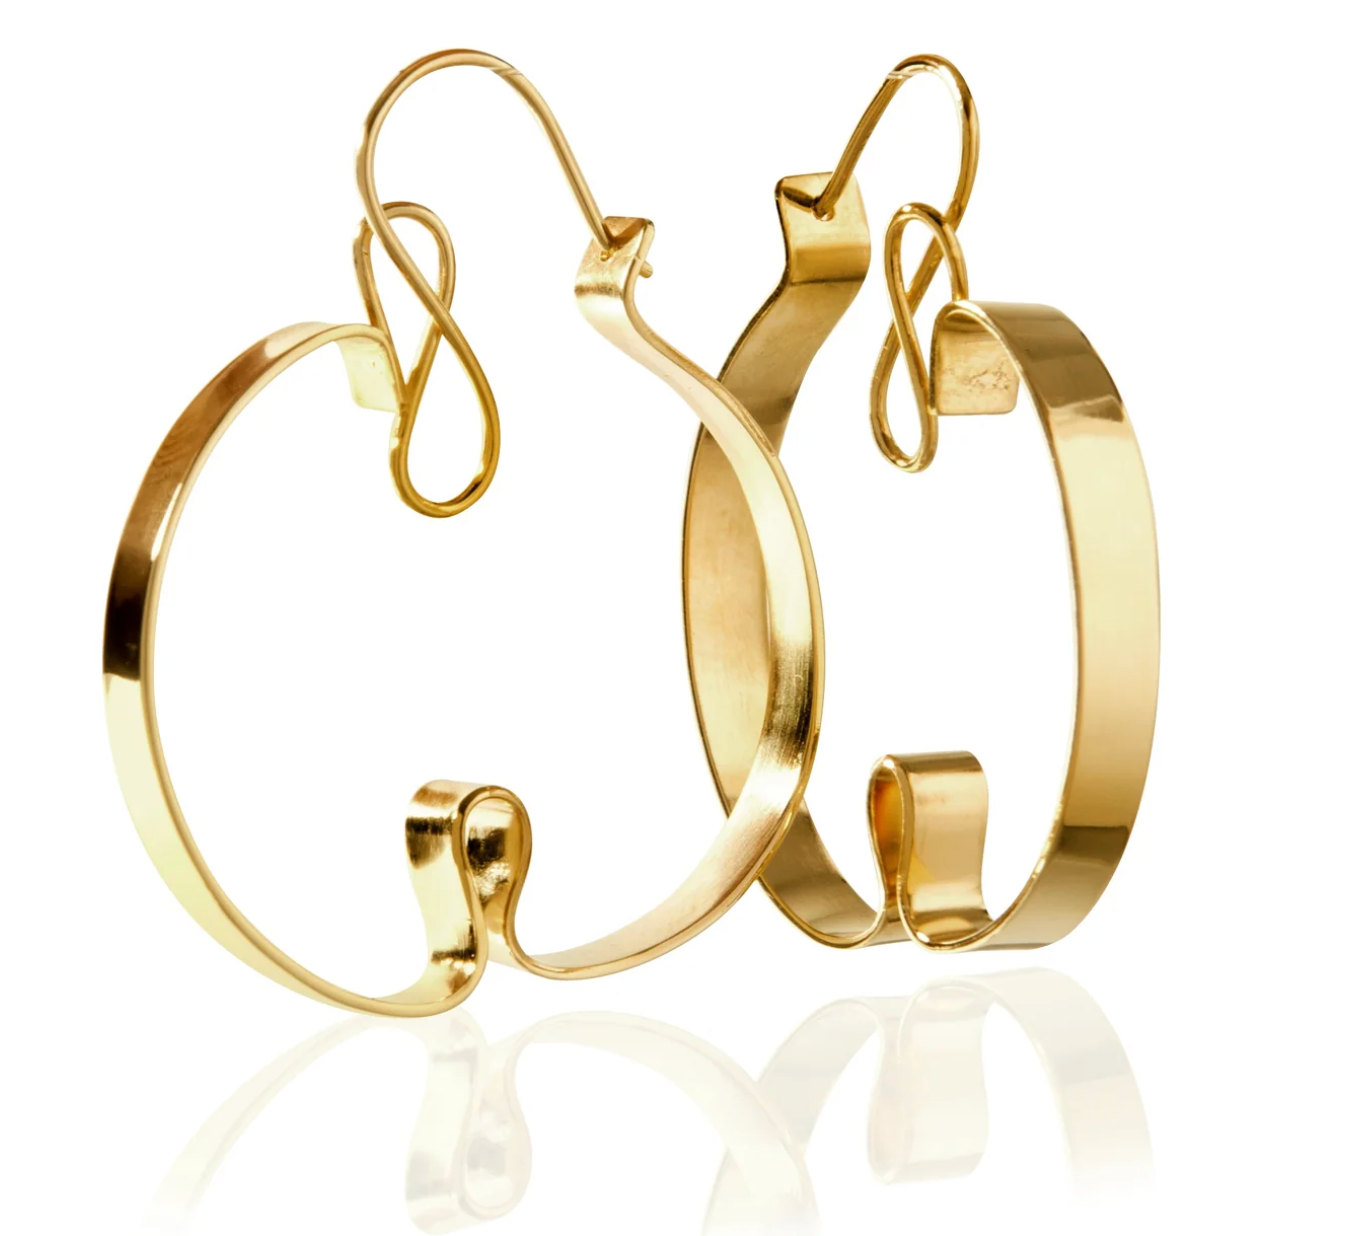 curled gold hoop stud earrings angled on a white background